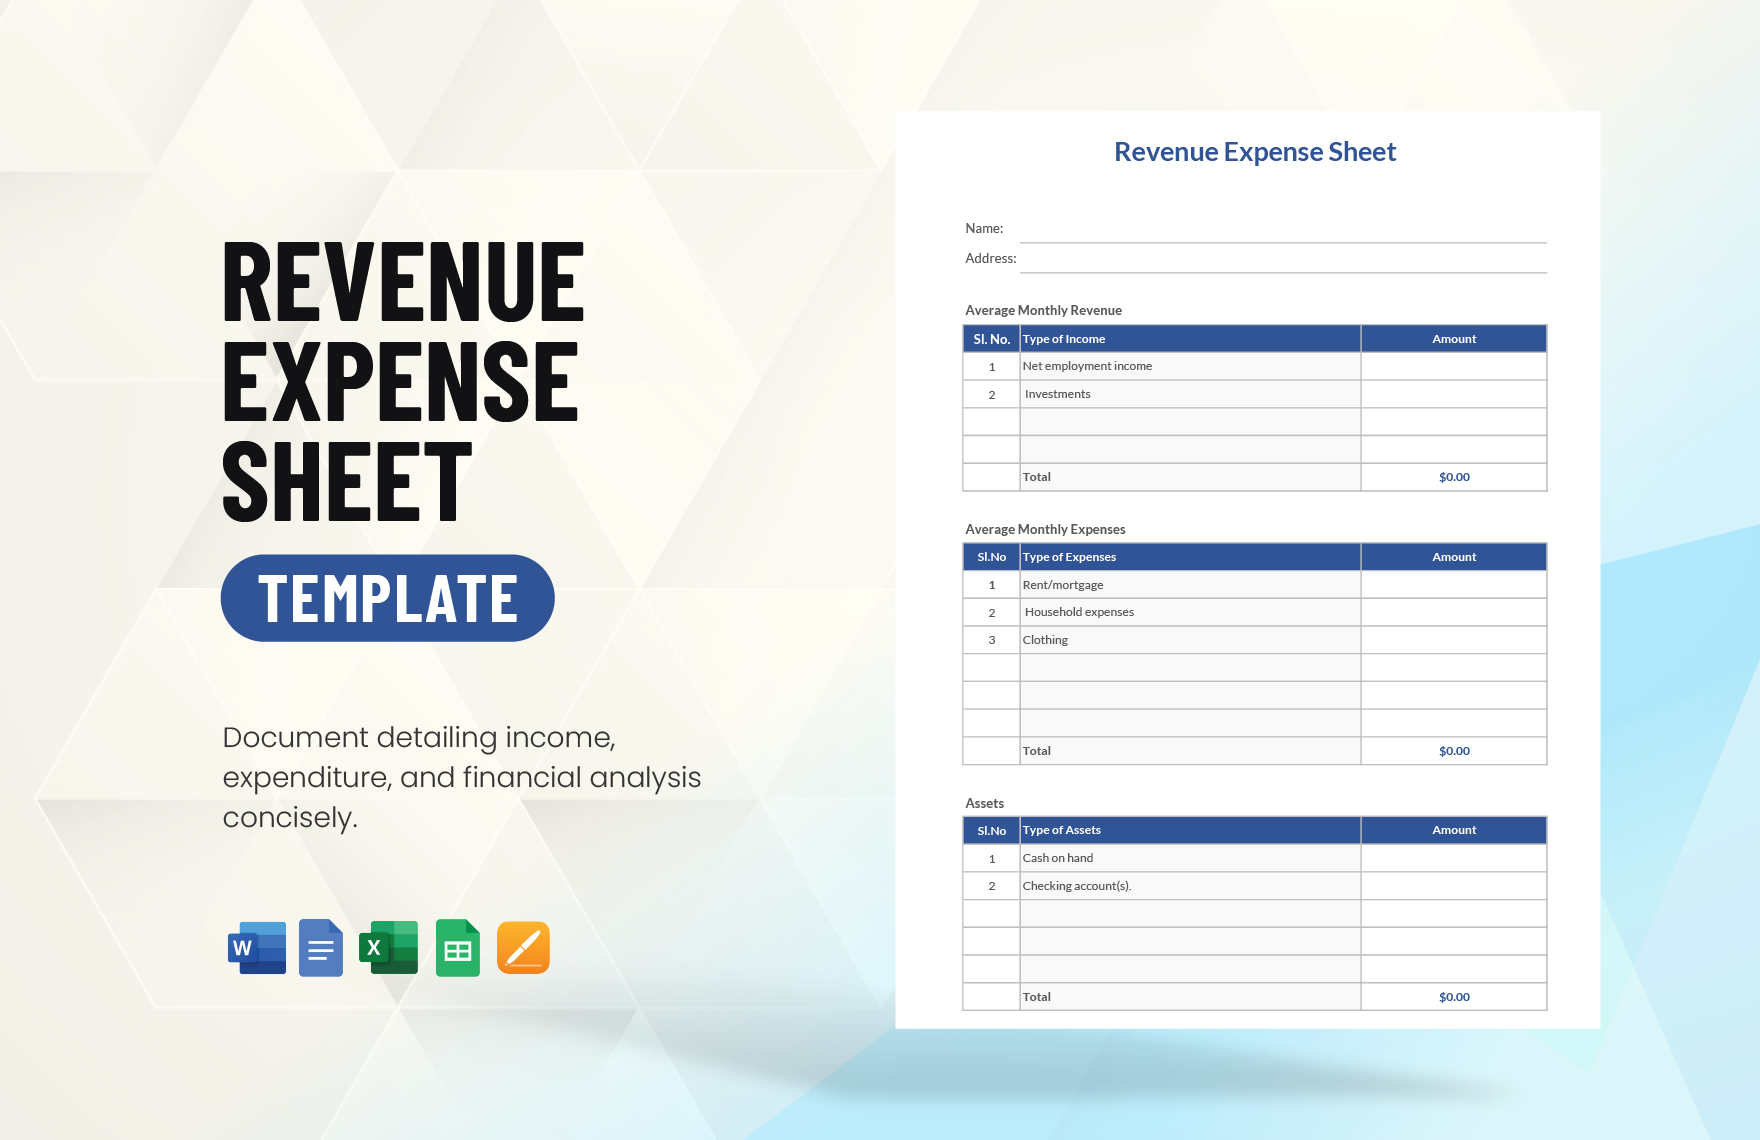 Revenue Expense Sheet Template in Word, Google Docs, Excel, Apple Pages, Apple Numbers